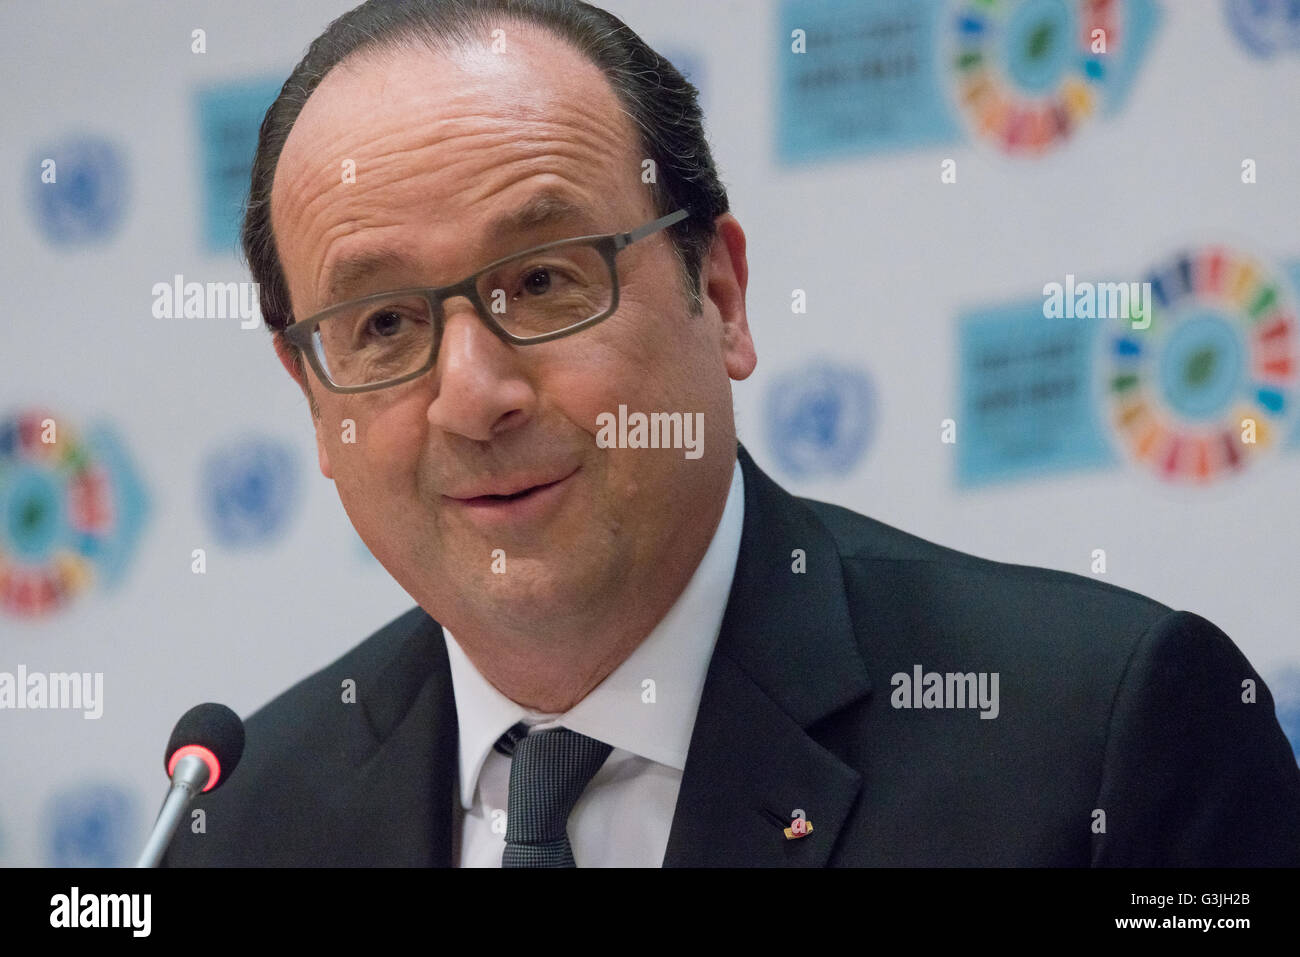 New York, United States. 22nd Apr, 2016. French President François Hollande speaks with the press. Following the opening for signature of the Global Climate Agreement at UN Headquarters in New York City, UN Secretary-General Ban Ki-moon, French President François Hollande, COP 21 President Ségolène Royal, and Executive Secretary of the UN Framework Concention on Climate Change (UNFCCC) Christiana Figueres met with the UN press corps to discuss the agreement's implementation. © Albin Lohr-Jones/Pacific Press/Alamy Live News Stock Photo